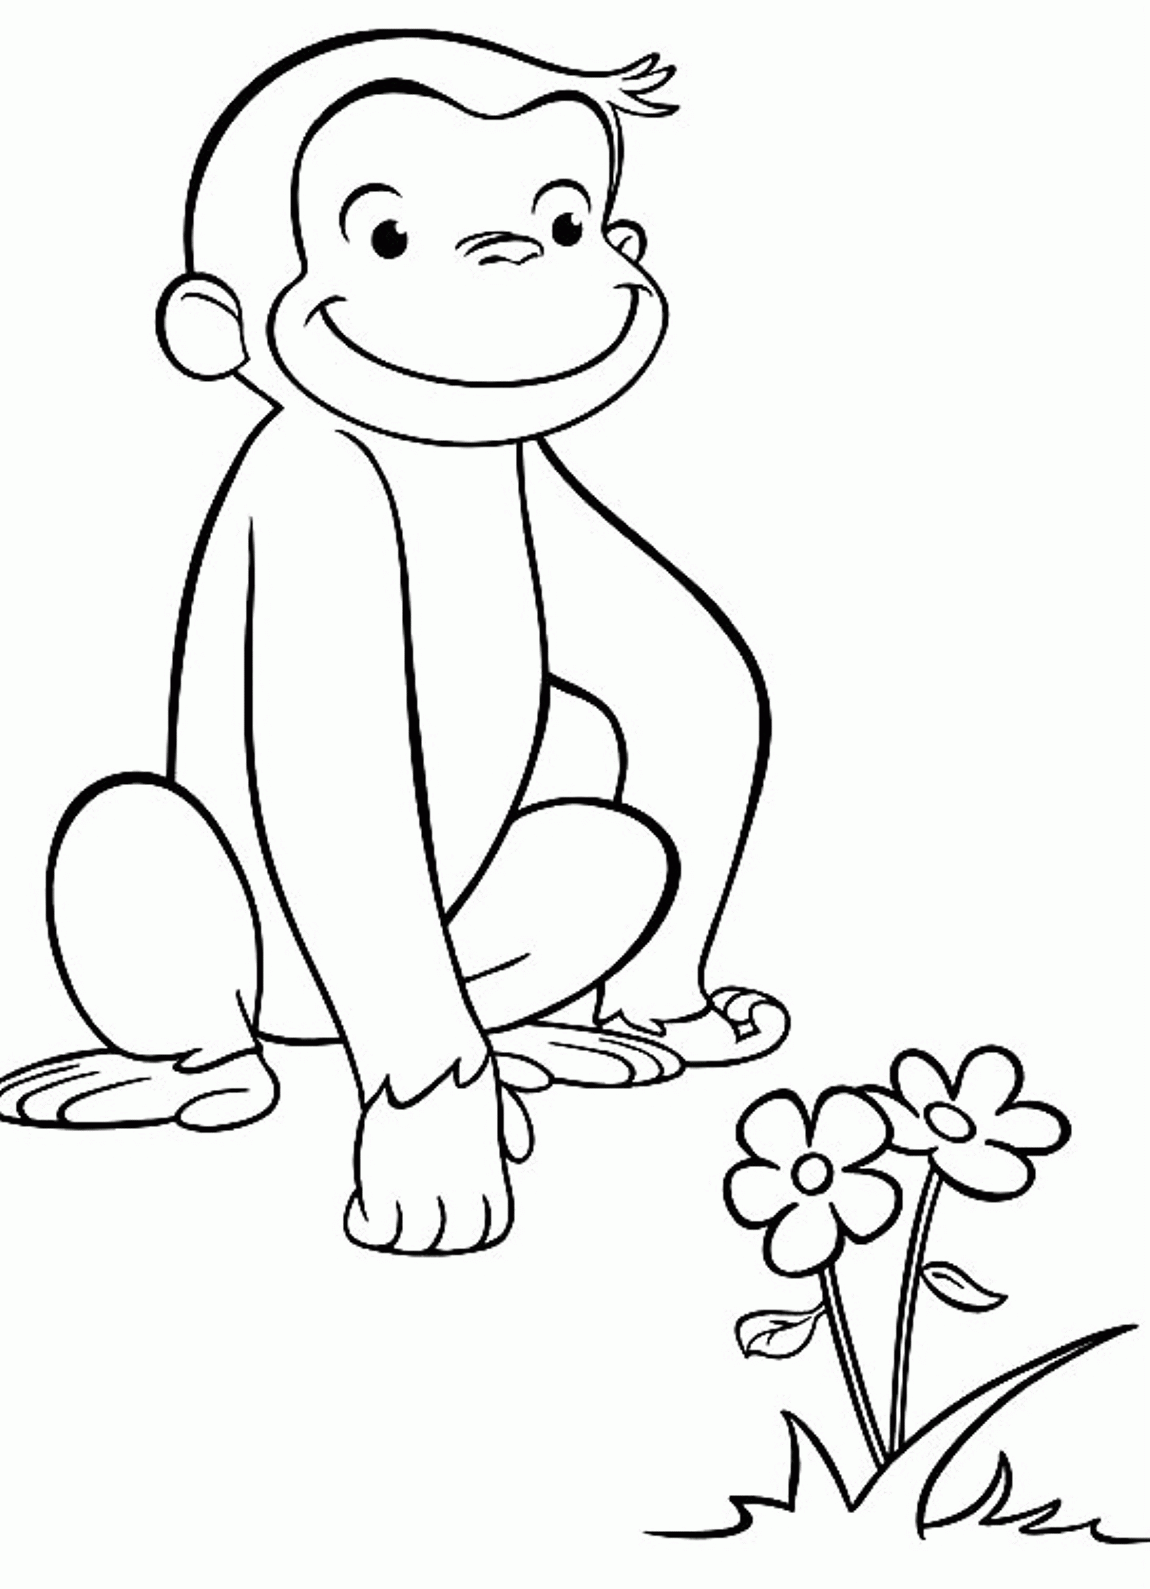 Curious Coloring Pages To Print Coloring Home